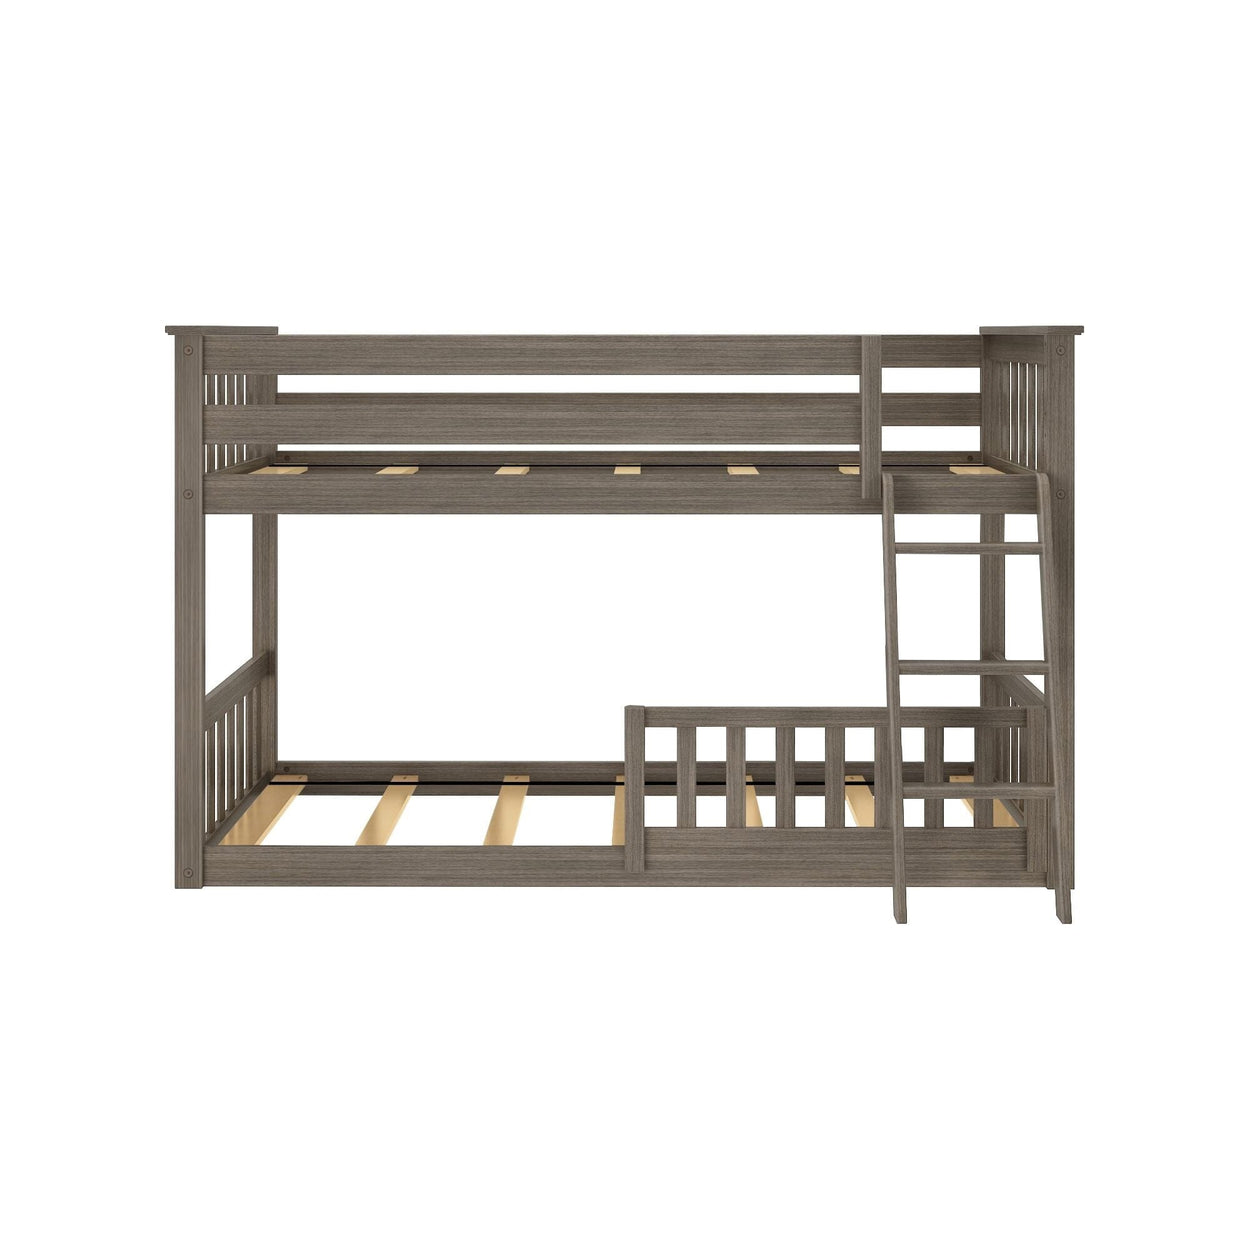 180214151109 : Bunk Beds Twin over Twin Low Bunk with Single Guard Rail, Clay